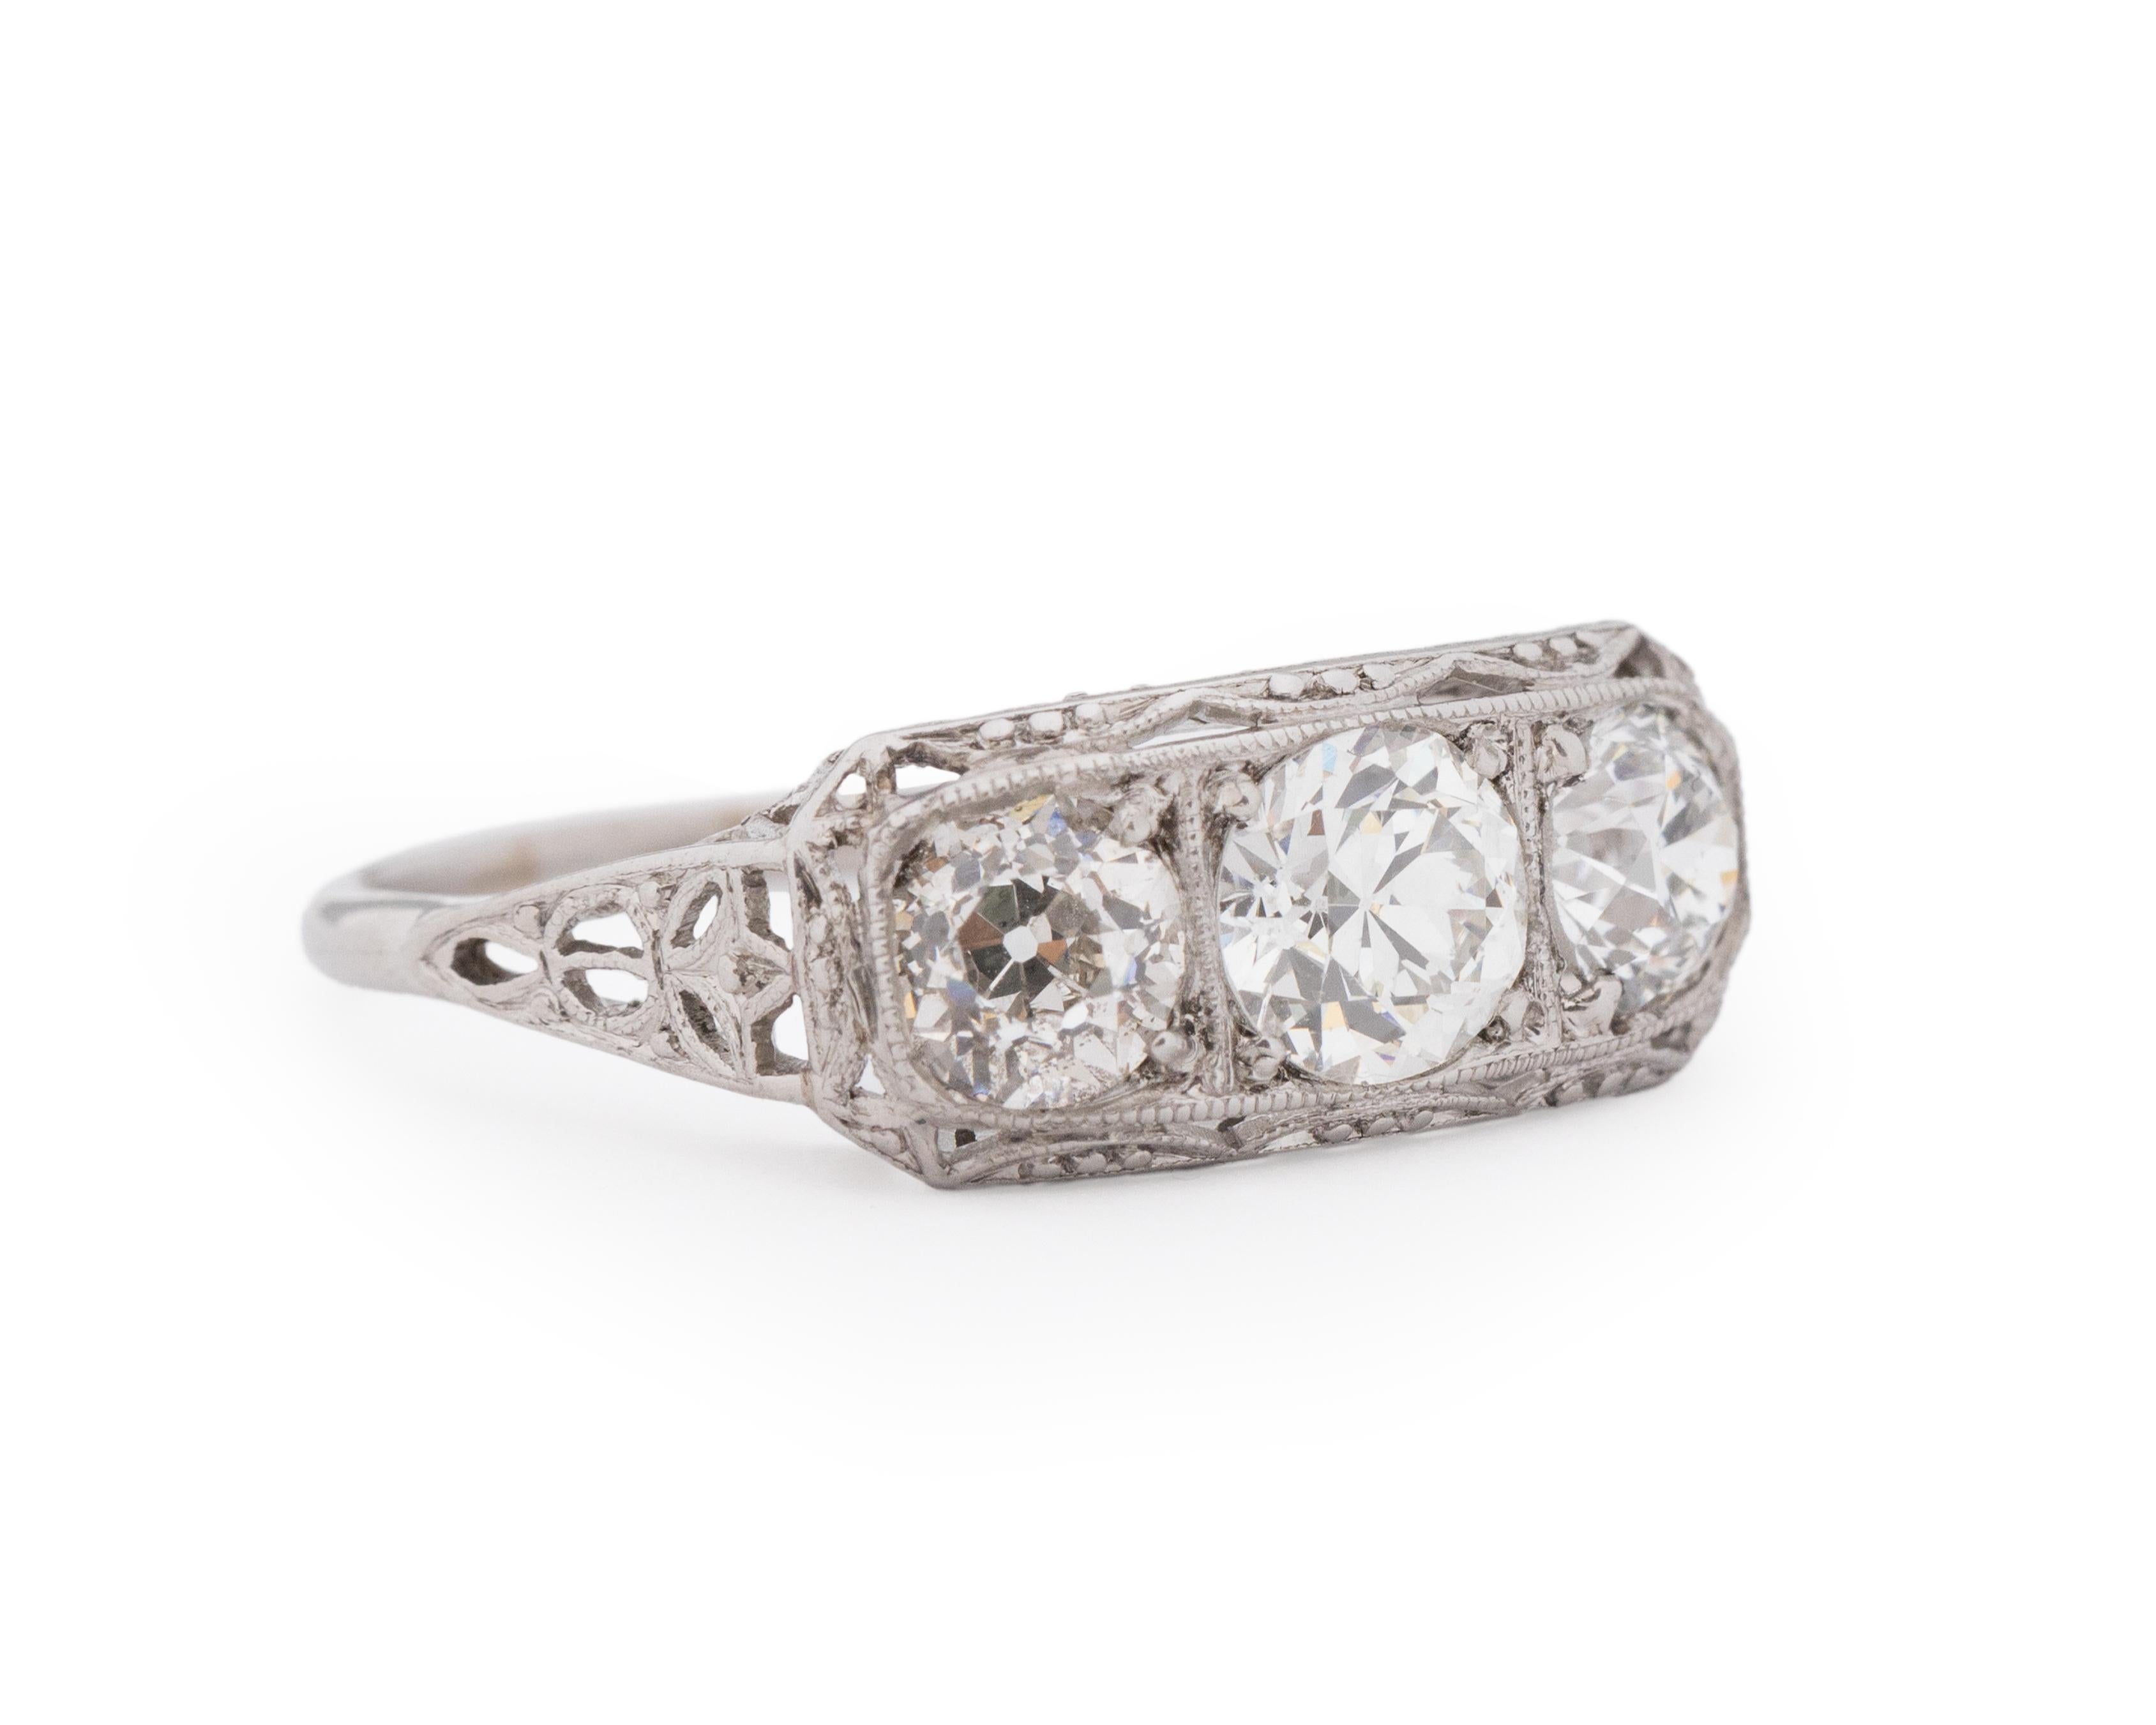 Item Details:
Ring Size: 7.75
Metal Type: Platinum [Hallmarked, and Tested]
Weight: 3.4 grams

Center Diamond Details:

GIA Report#: 6234153818
Weight: .66ct
Cut: Old European brilliant
Color: H
Clarity: SI1
Type: Natural

Side Diamond Details: